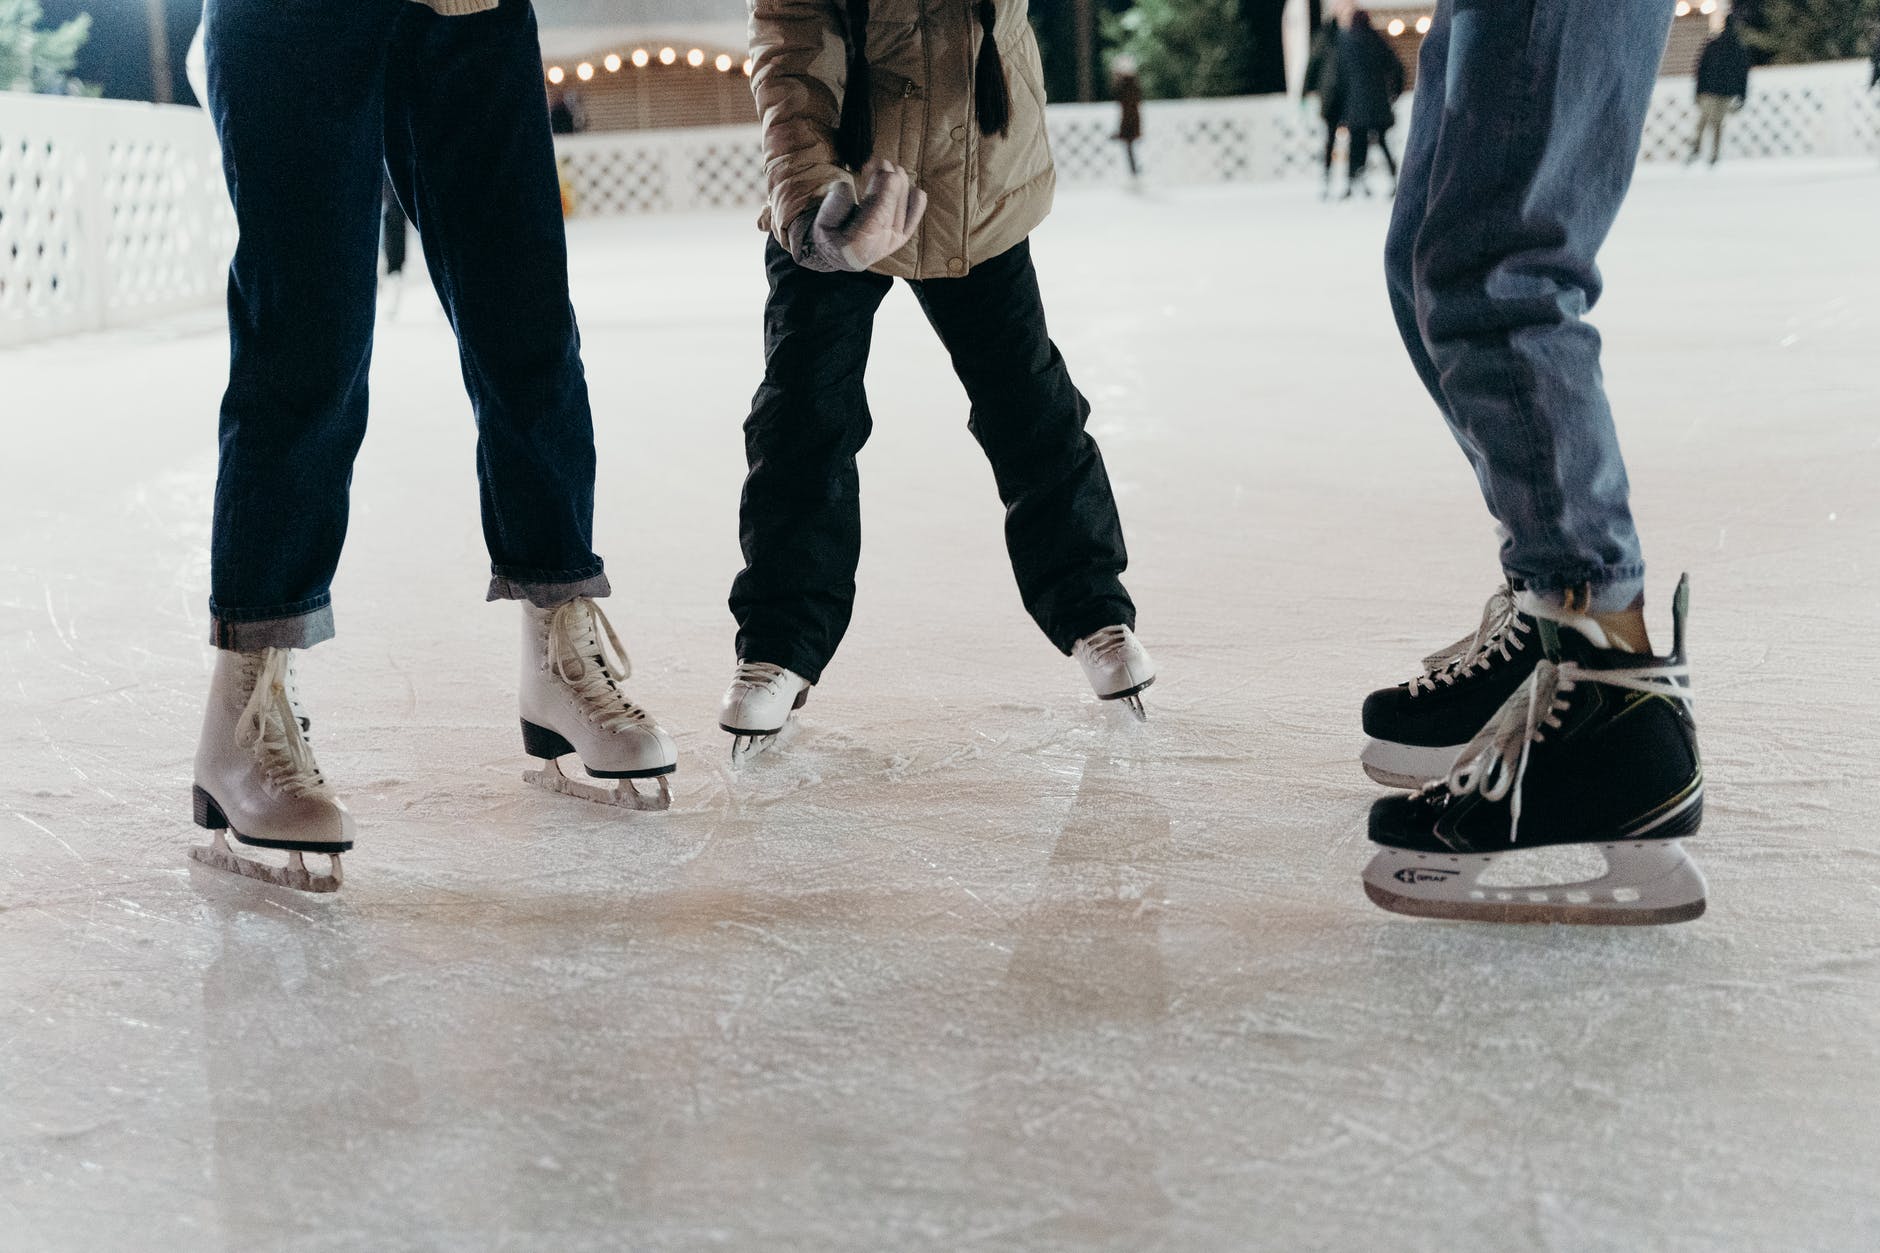 people ice skating together